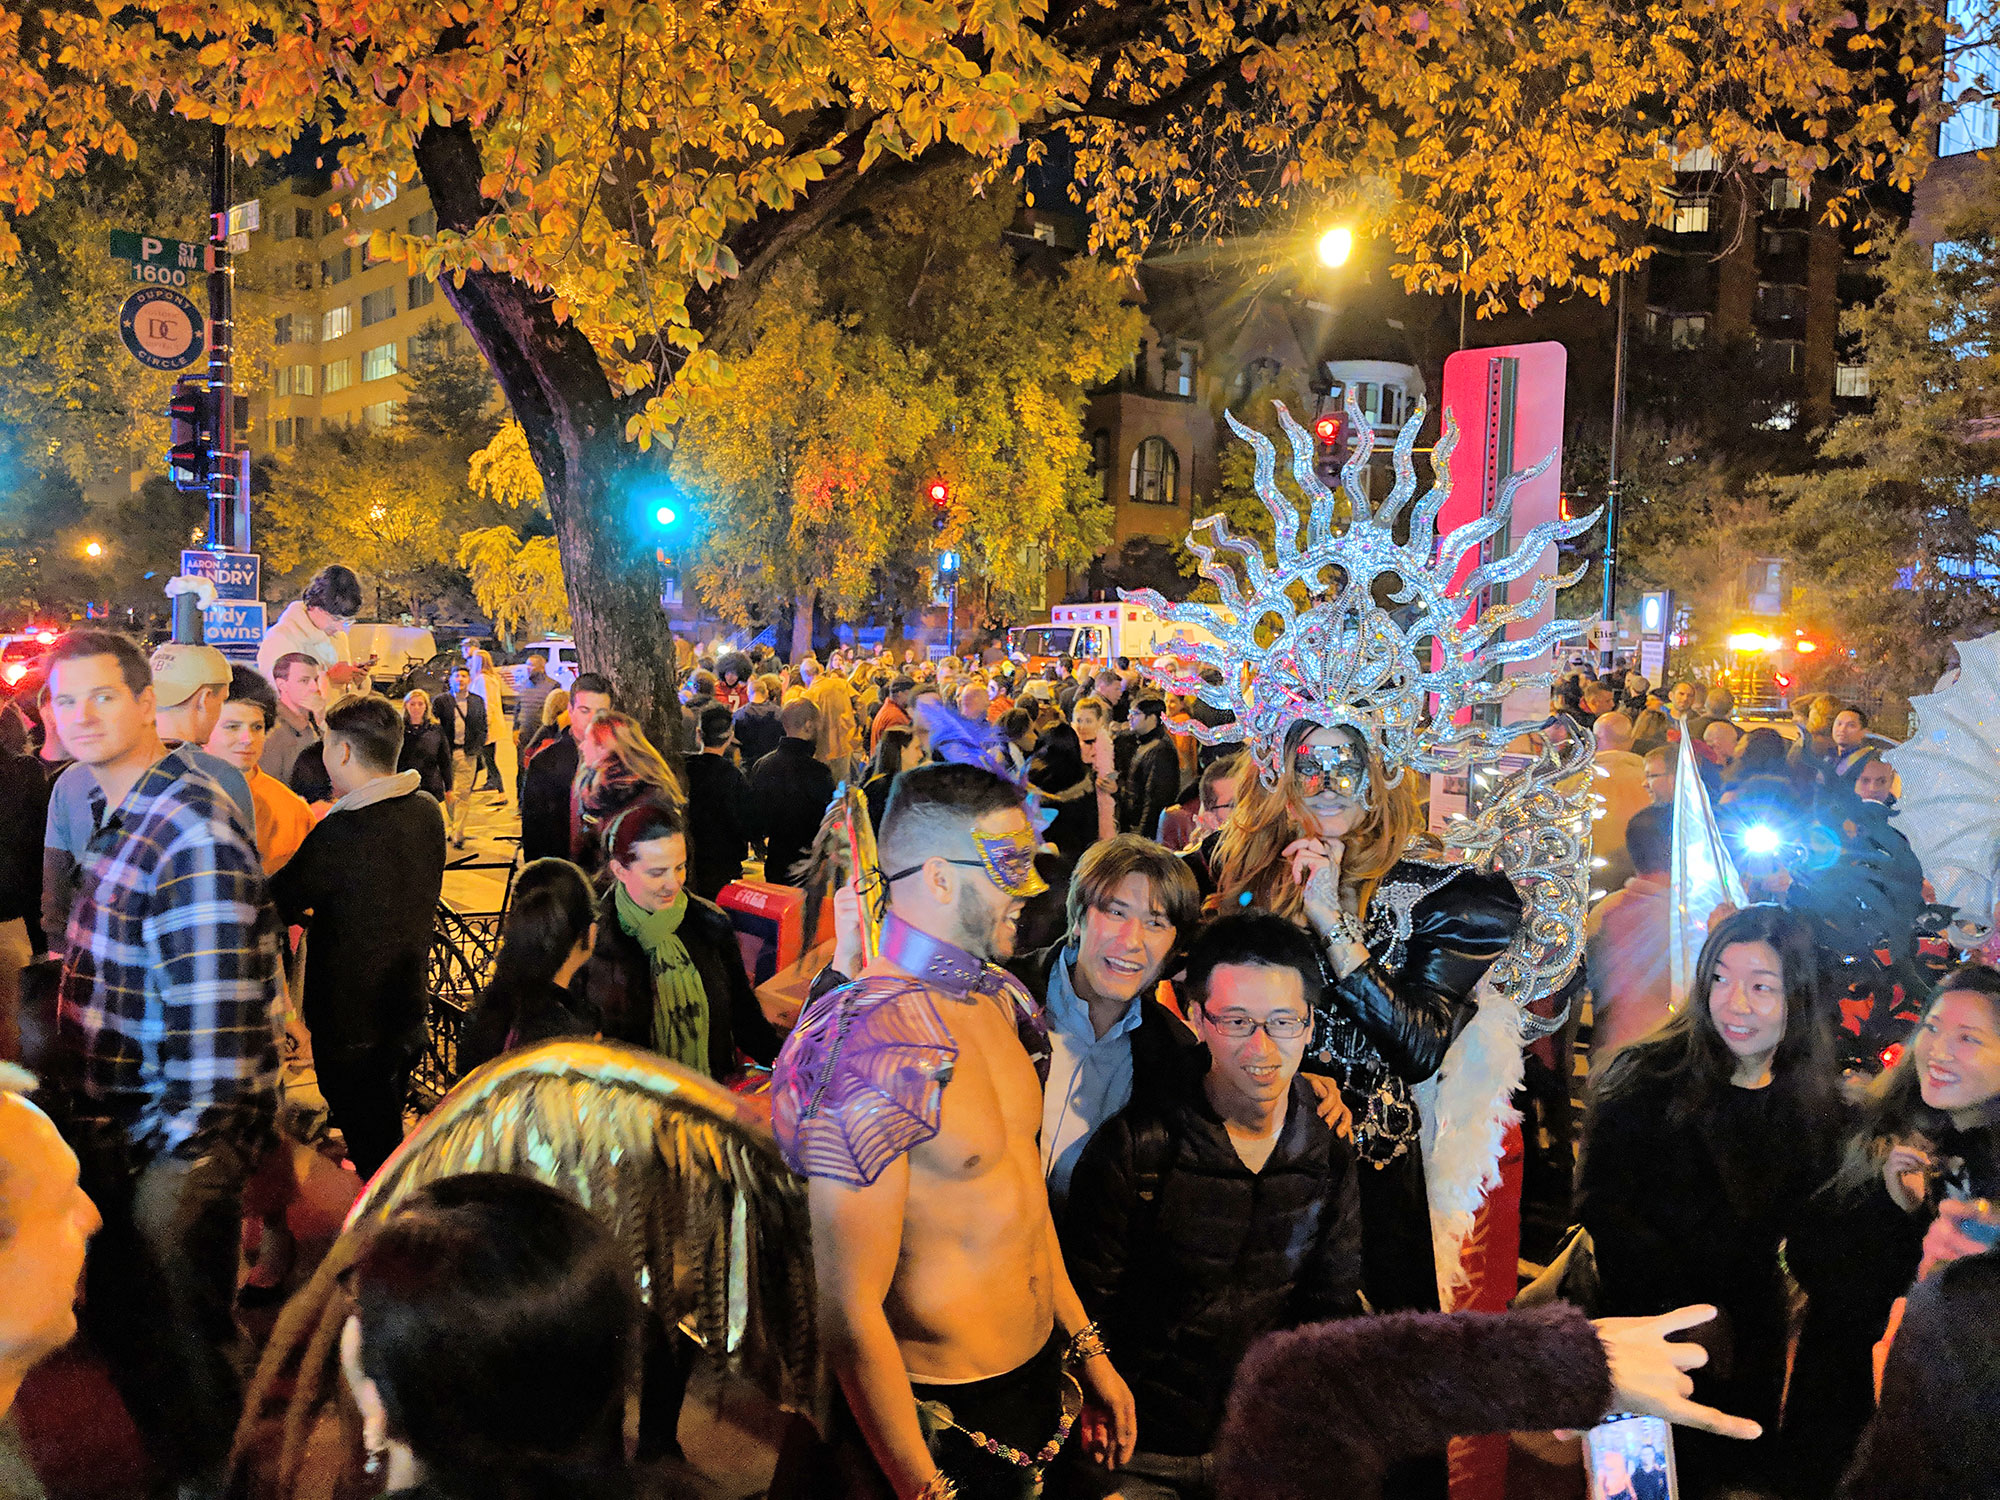 Drag queens and participants at the 2018 High Heel Race.